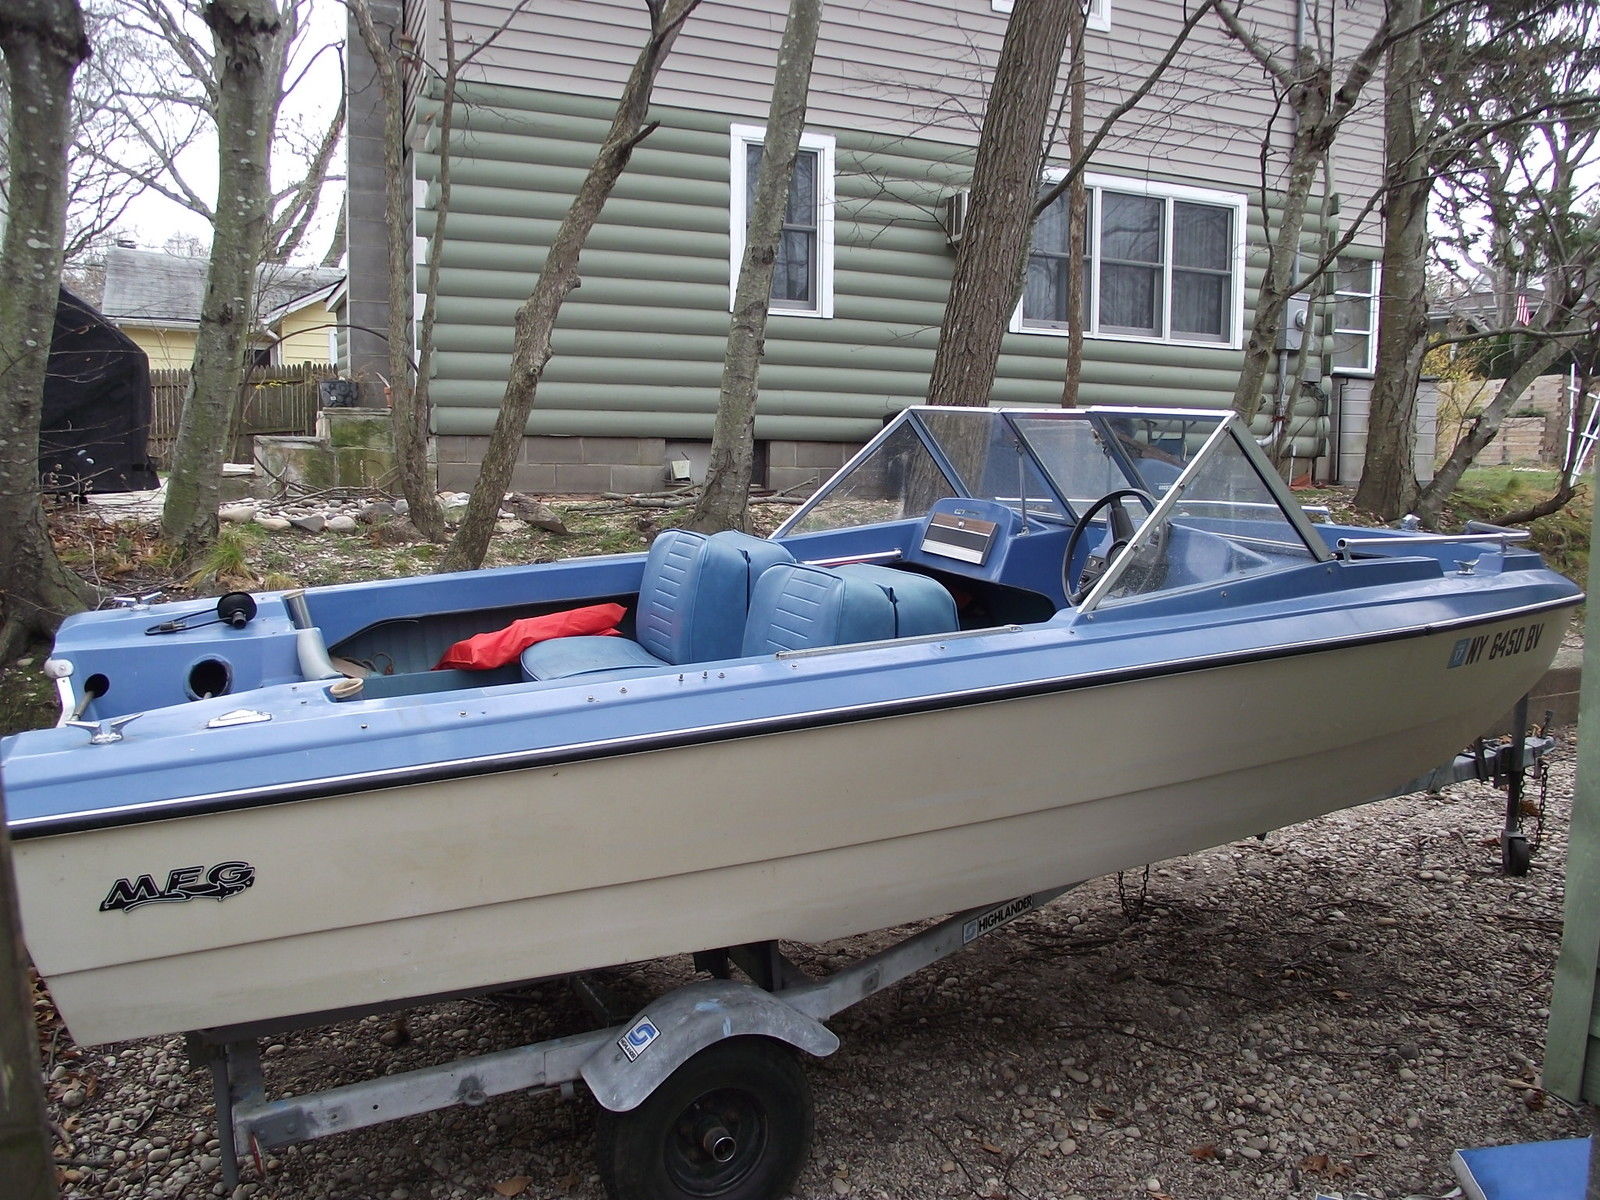 MFG GYPSY 1970 for sale for $675 - Boats-from-USA.com